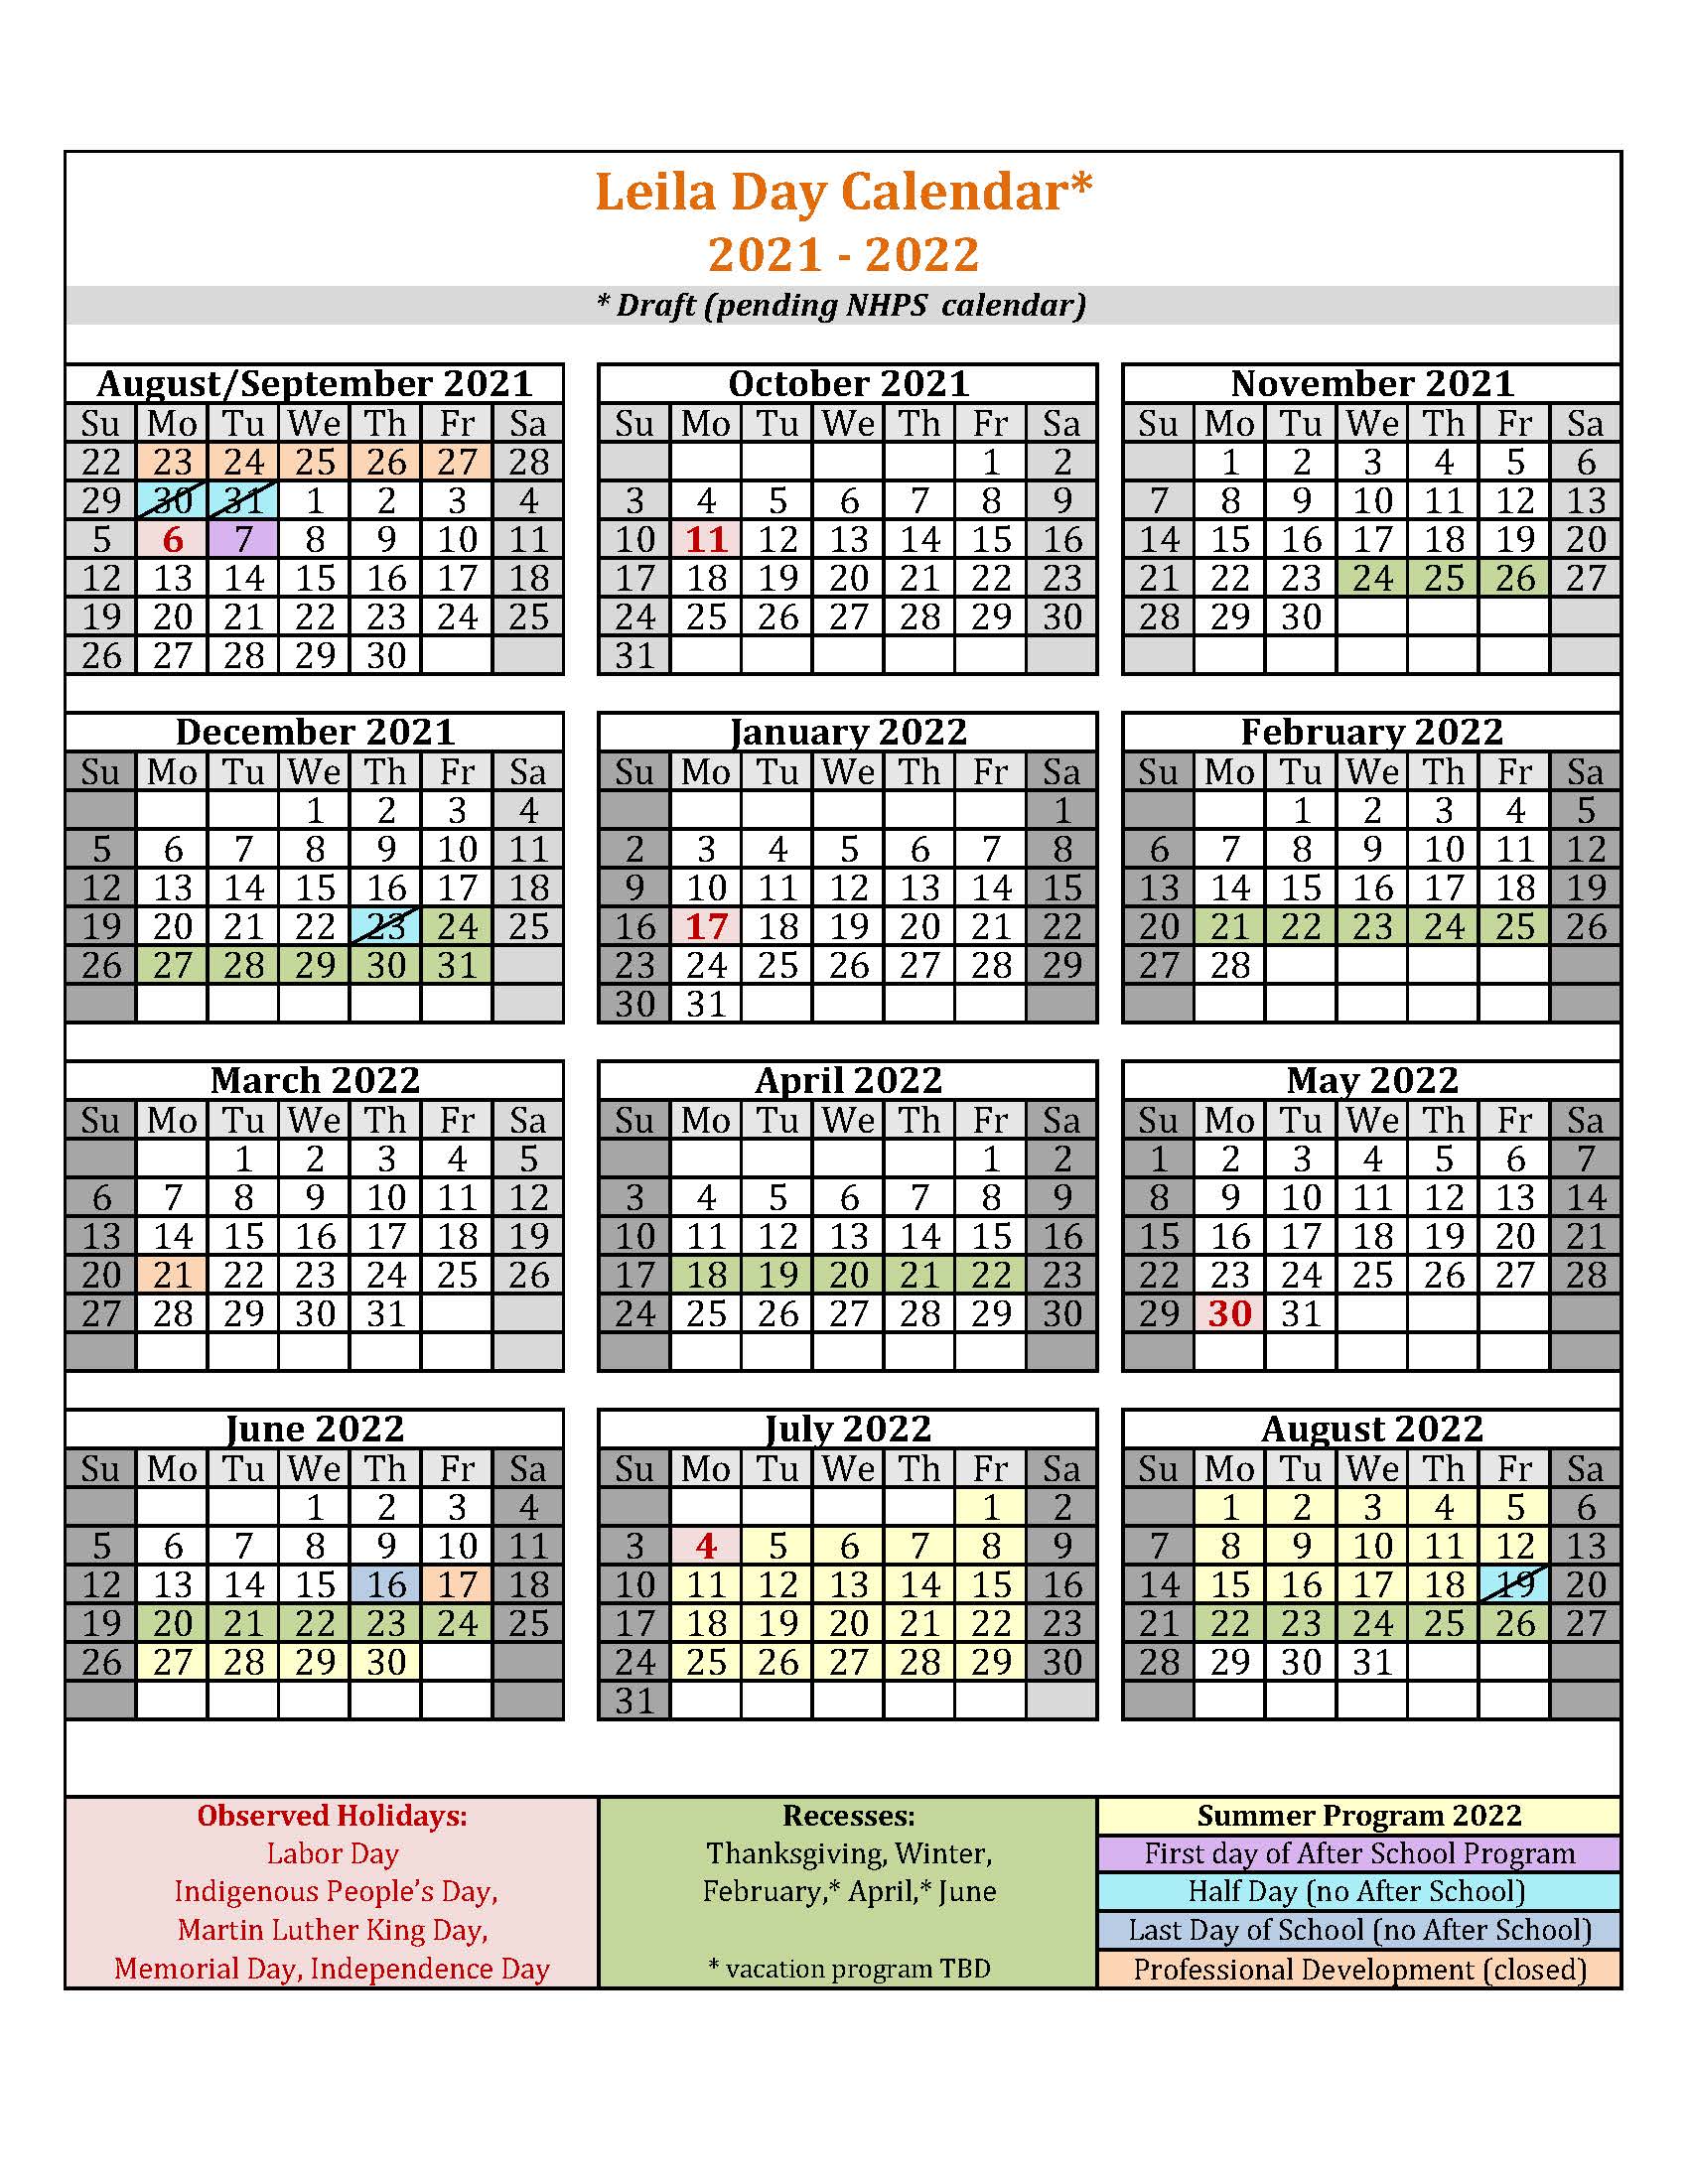 university-of-new-haven-academic-calendar-2022-printable-word-searches